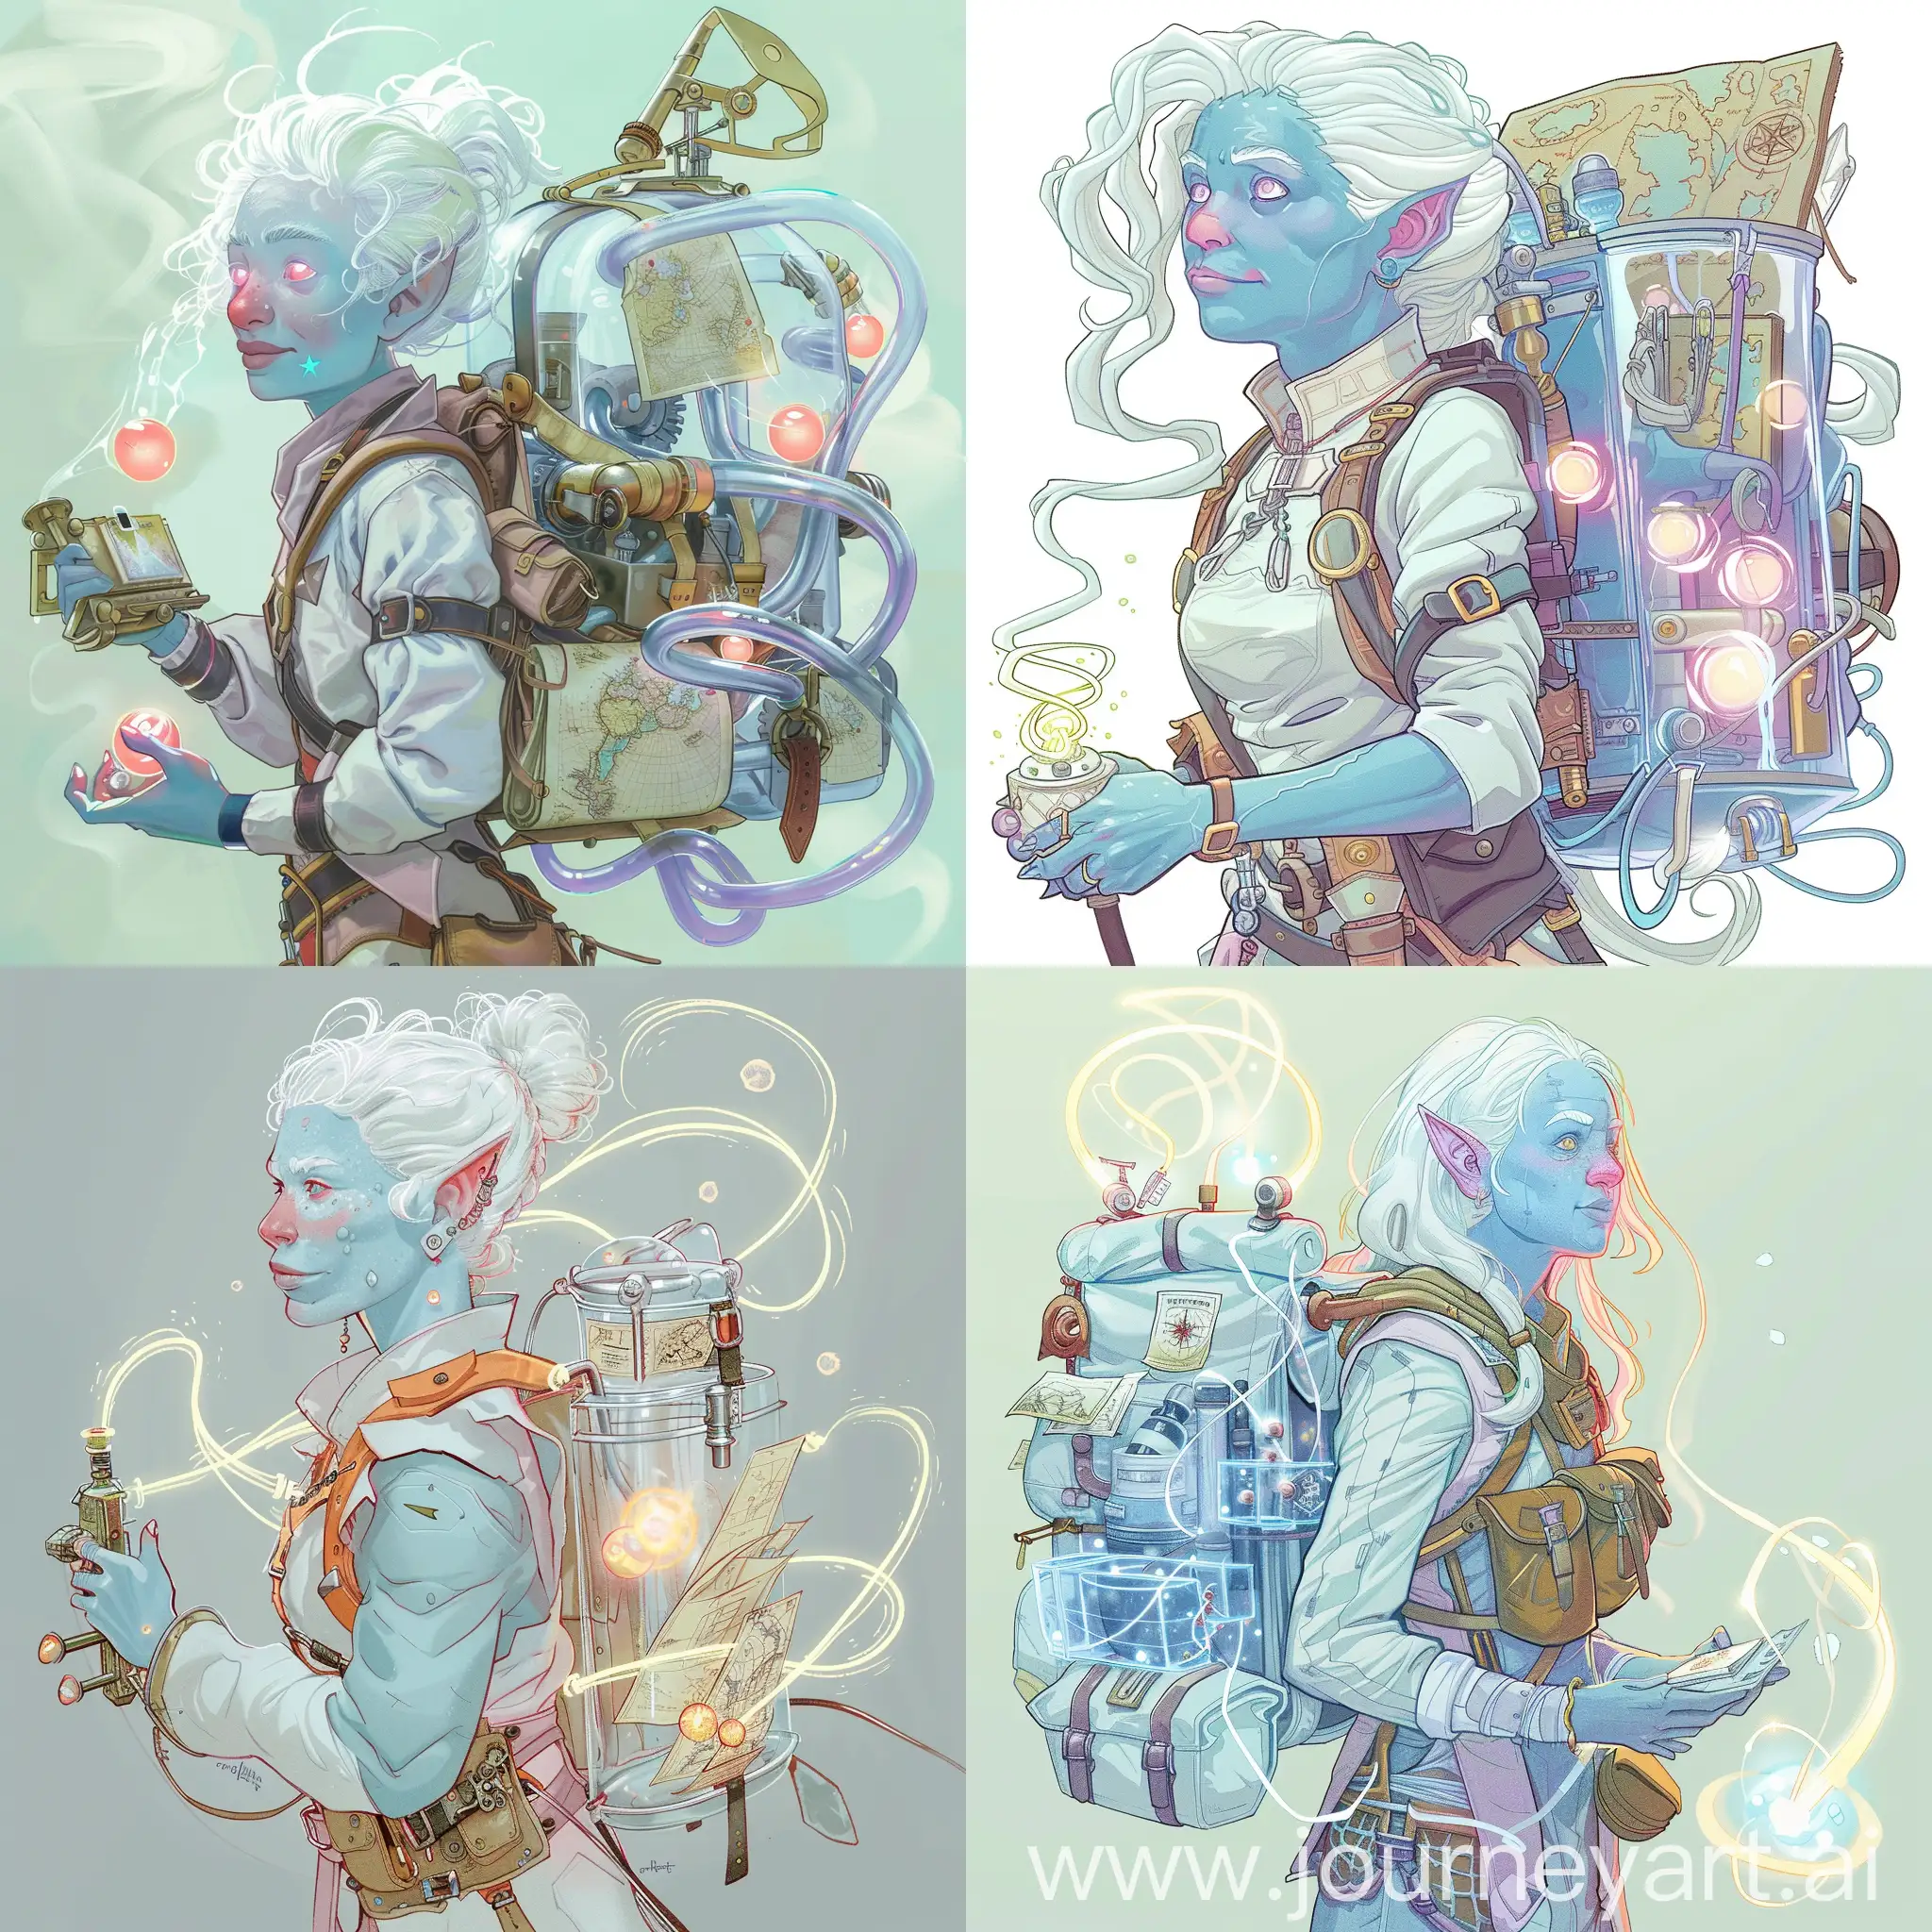  A whimsically drawn dungeons and dragons character portrait of a female firbolg artificer with pale blue skin and snow-white hair, sporting a rosy nose. She's equipped with a steampunk-inspired transparent backpack contraption, complete with swirling glowing orbs of arcane energy flowing through transparent tubes, destined for her expertly calibrated handheld launcher. The contraption has pockets stuffed full of maps and mapmaking tools, as she's a skilled cartographer who's just completed her degree and set out to chart the wonders of an Amazon-like jungle using magical parchment. She is wearing pastel safari gear.